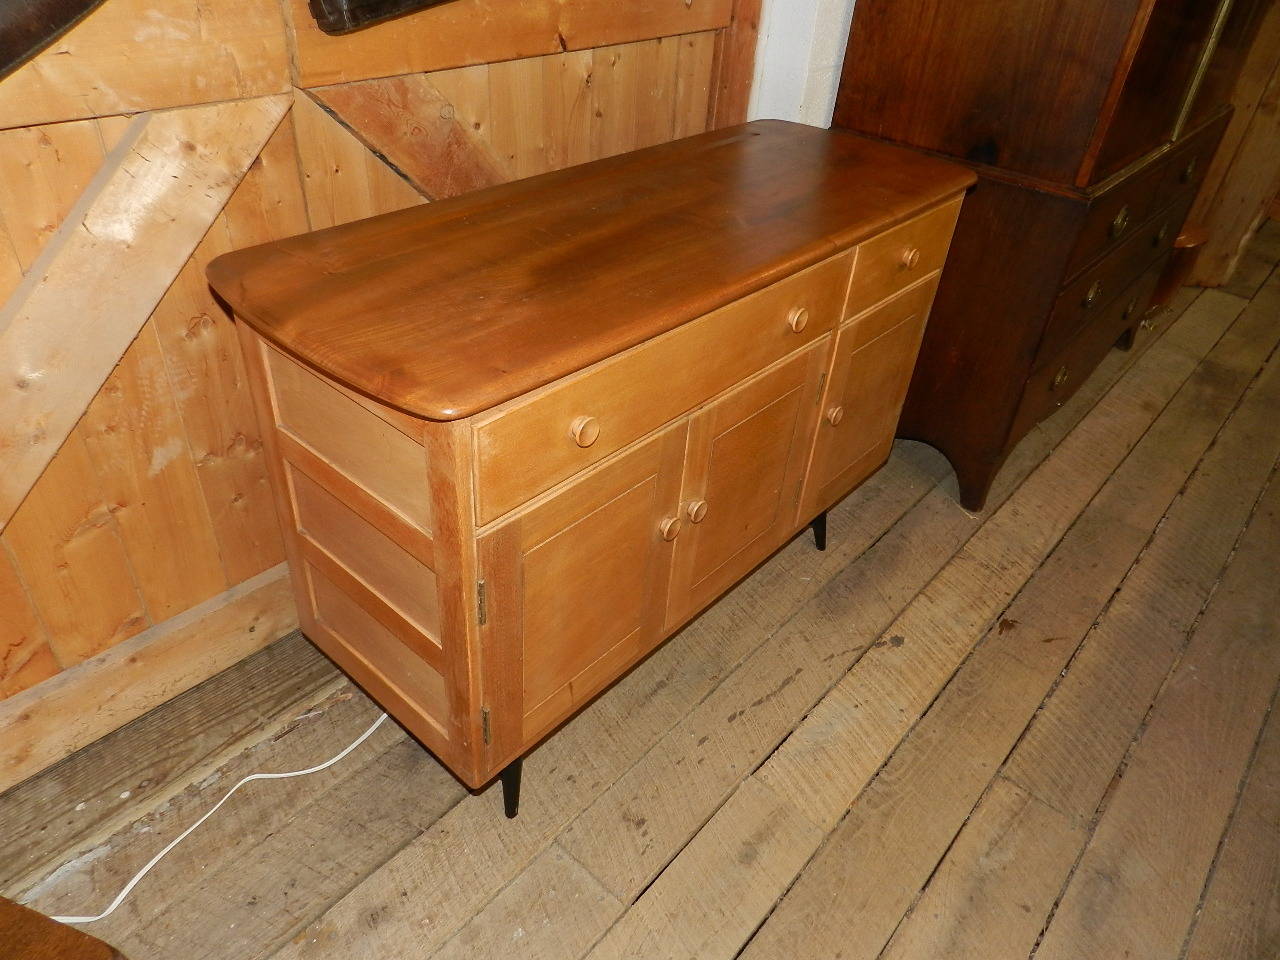 Teak sideboard with panelled sides made by Ercol. 3 panelled doors and 2 drawers supported upon tuned frame.